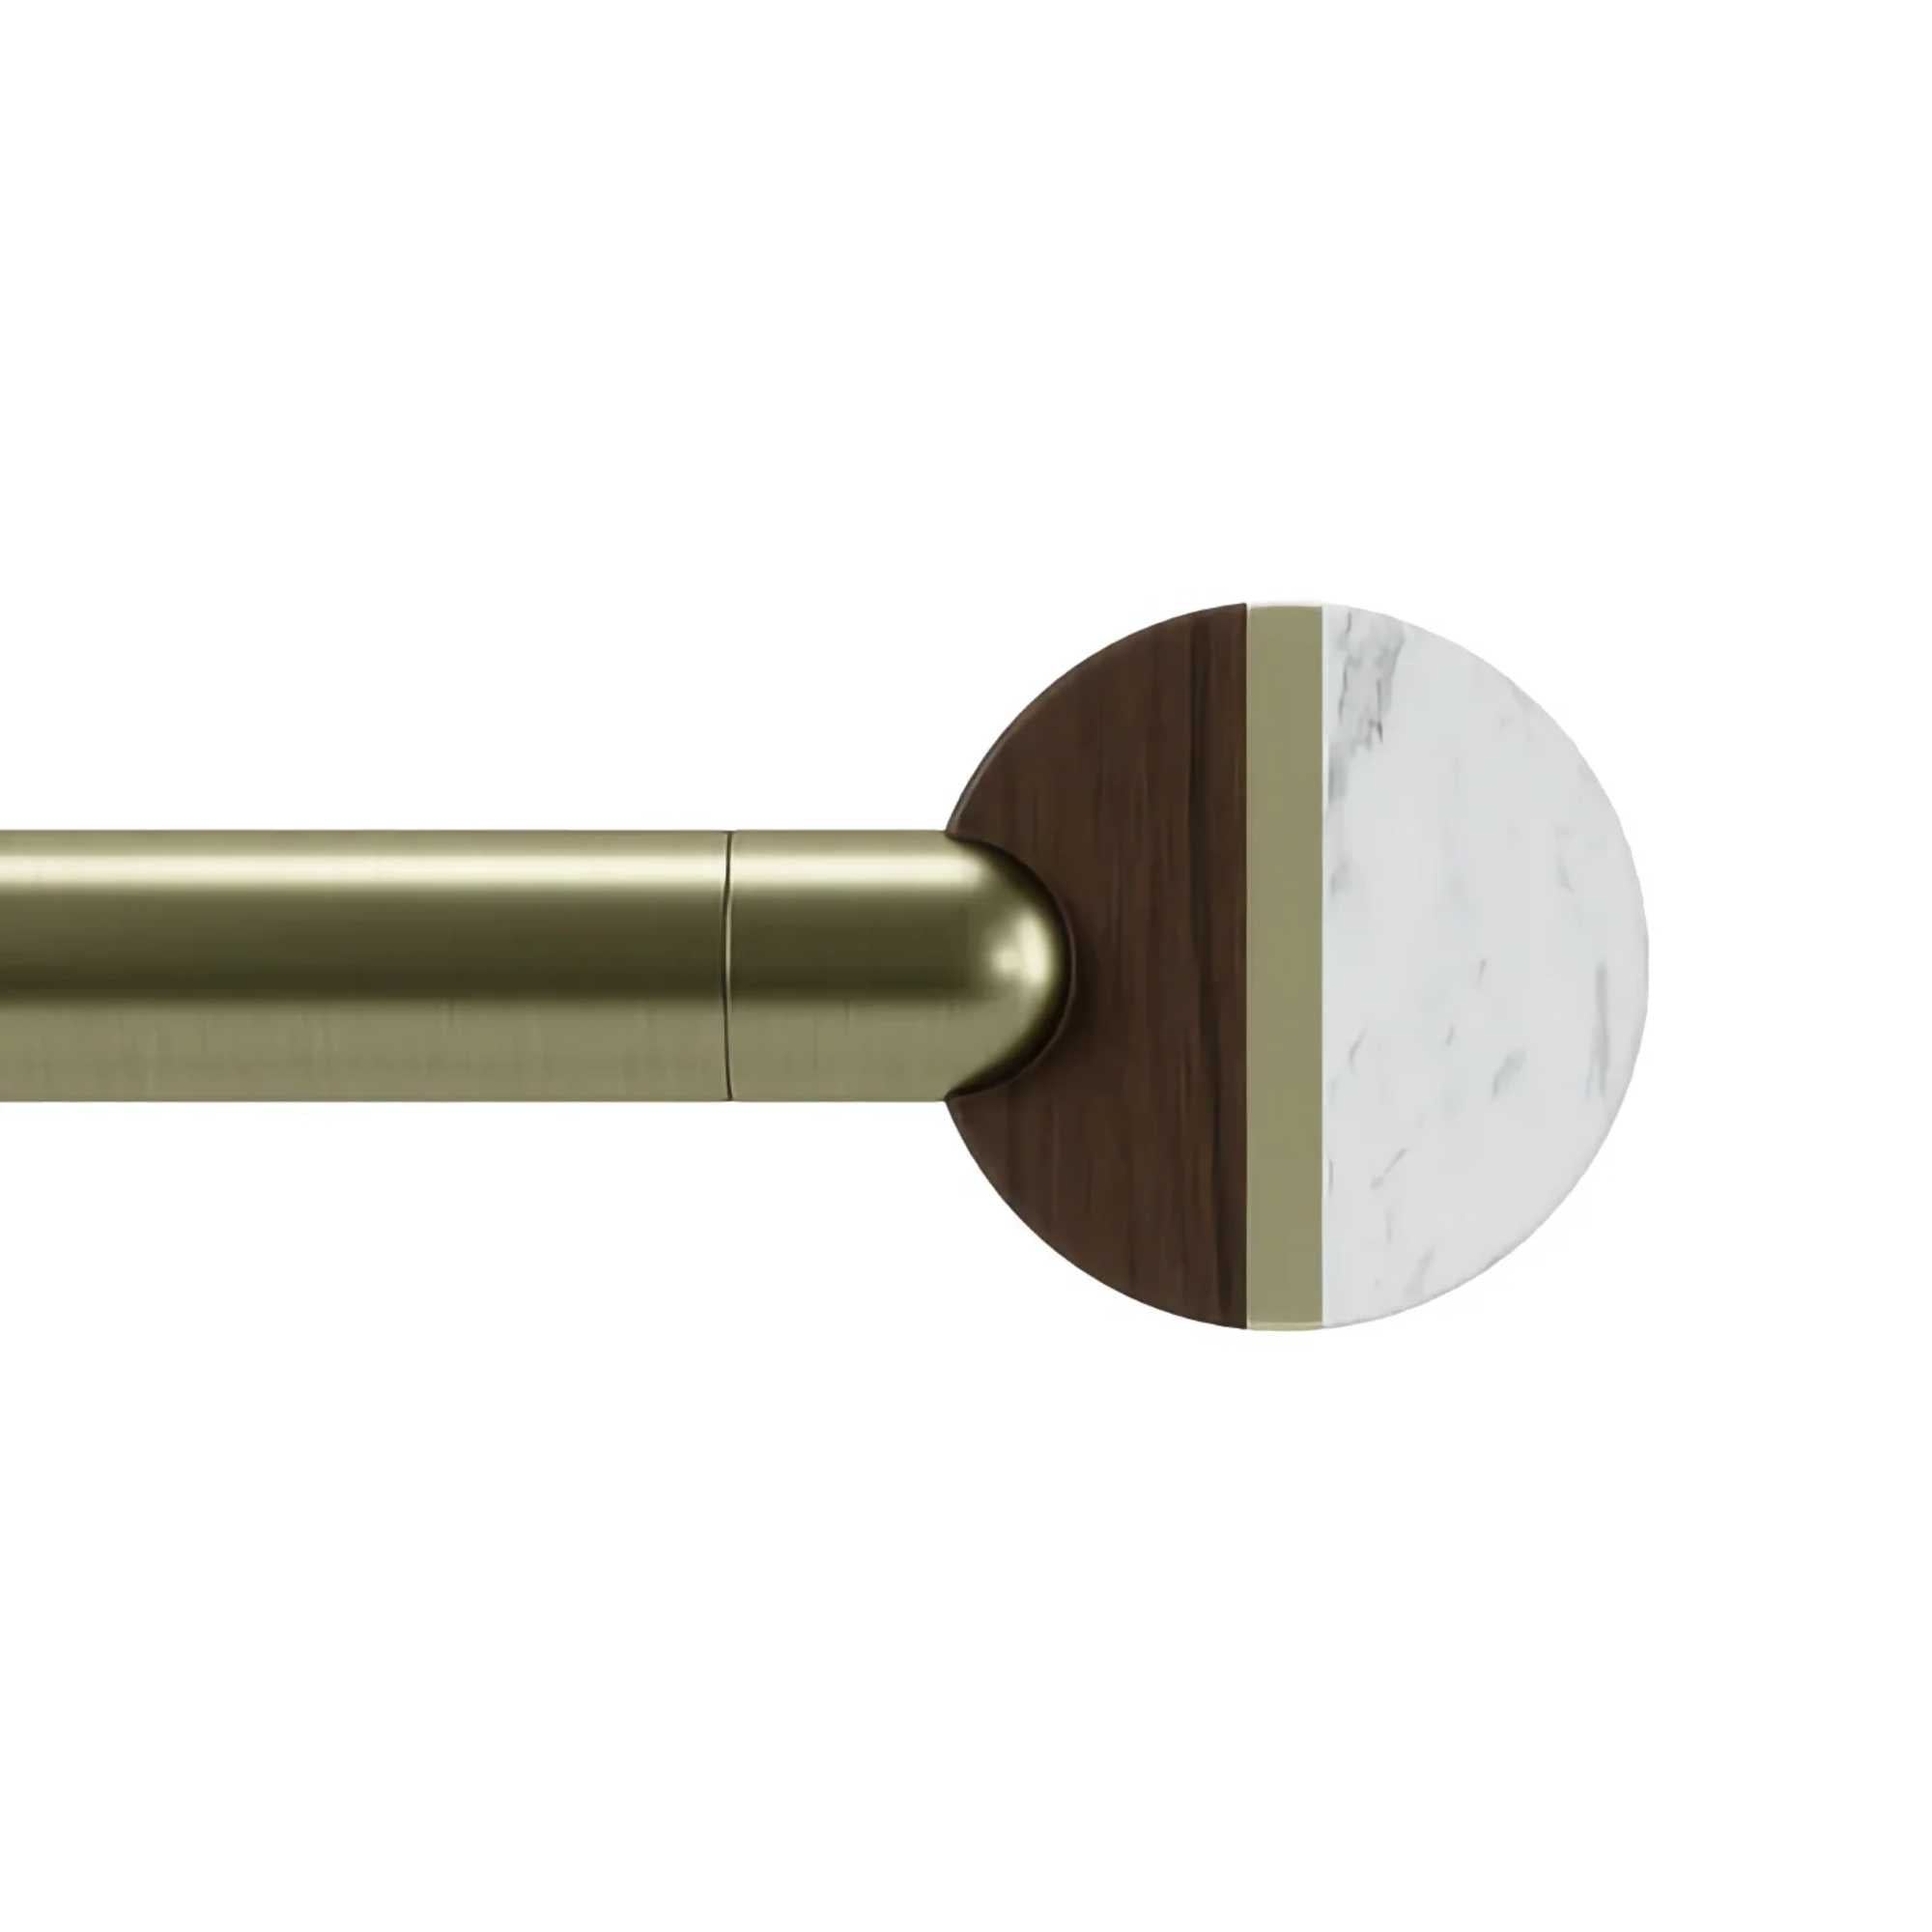 Umbra Lolly Curtain Rod 36-72" (91-183CM), Brushed Brass